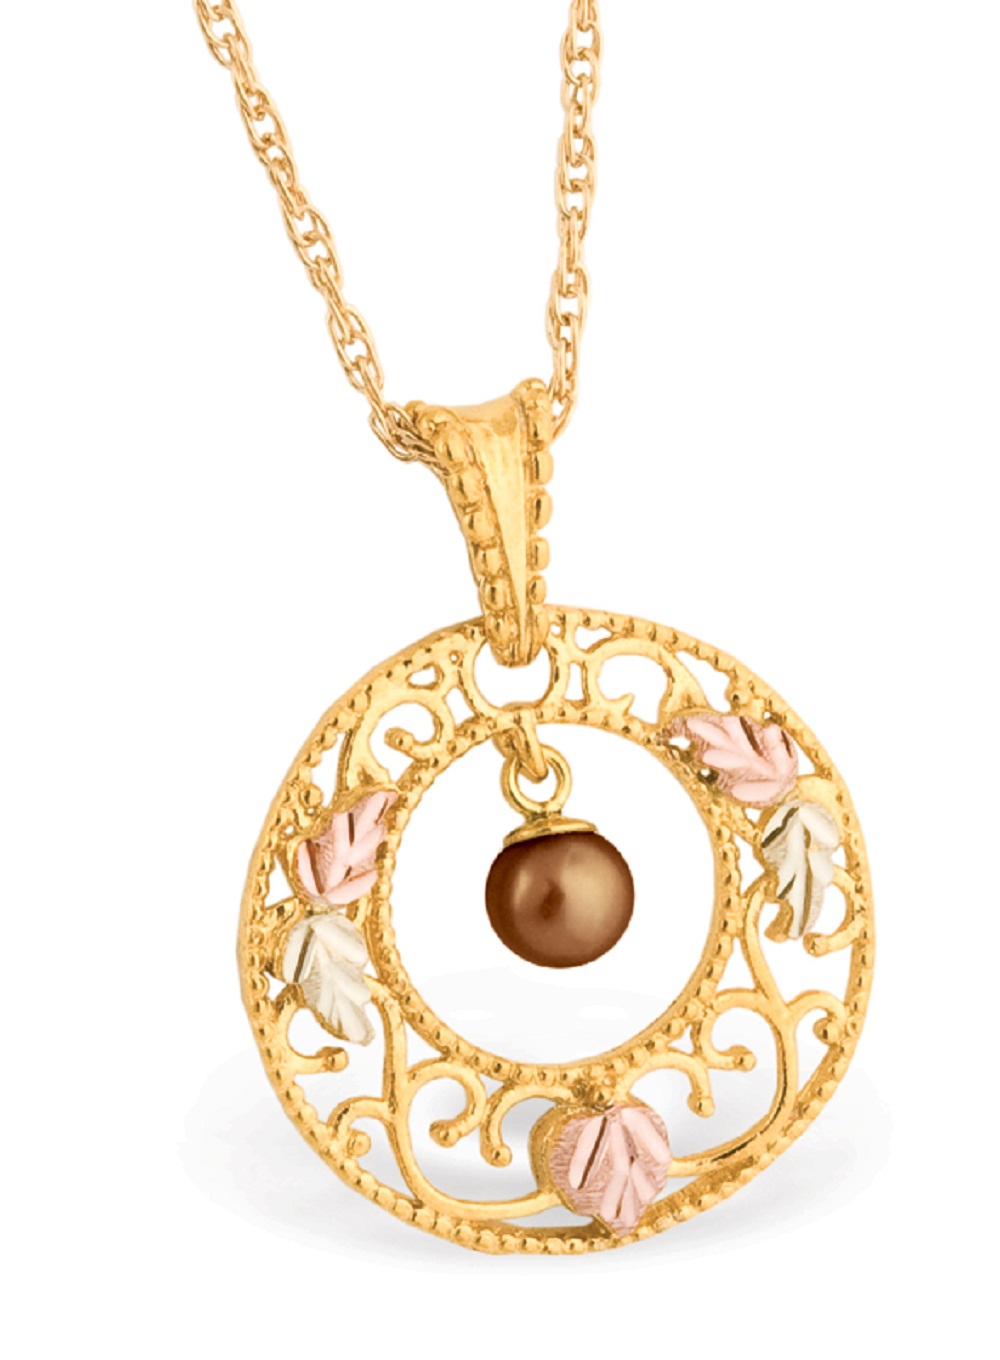 Black Hills Gold Necklace with Brown Pearl inside Circle and Grape Leaf Pendant. 